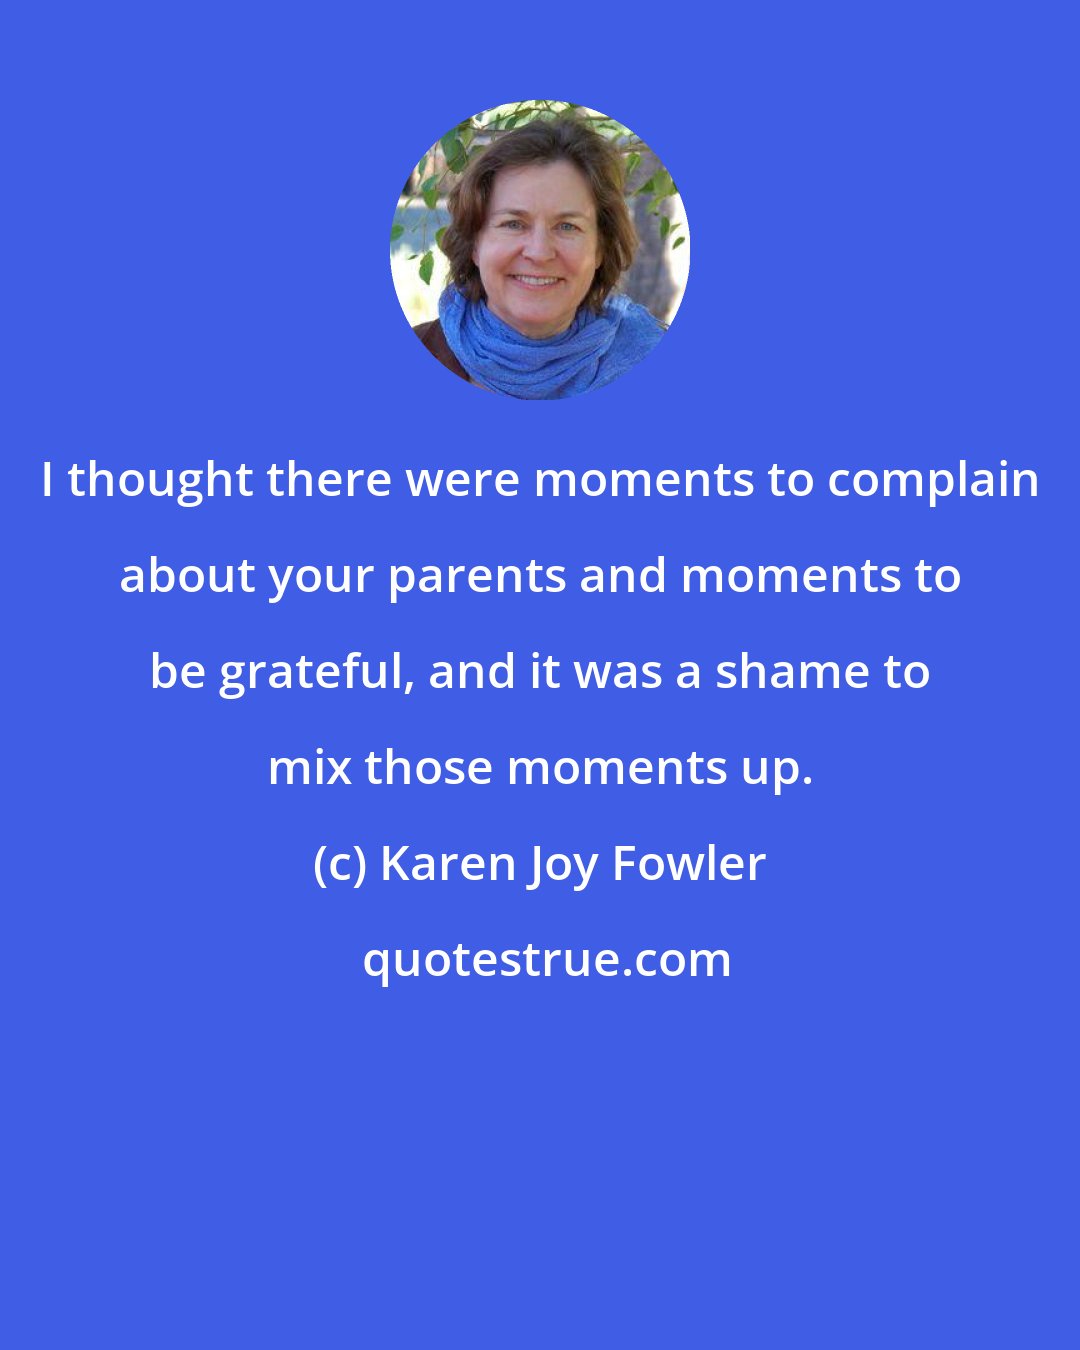 Karen Joy Fowler: I thought there were moments to complain about your parents and moments to be grateful, and it was a shame to mix those moments up.